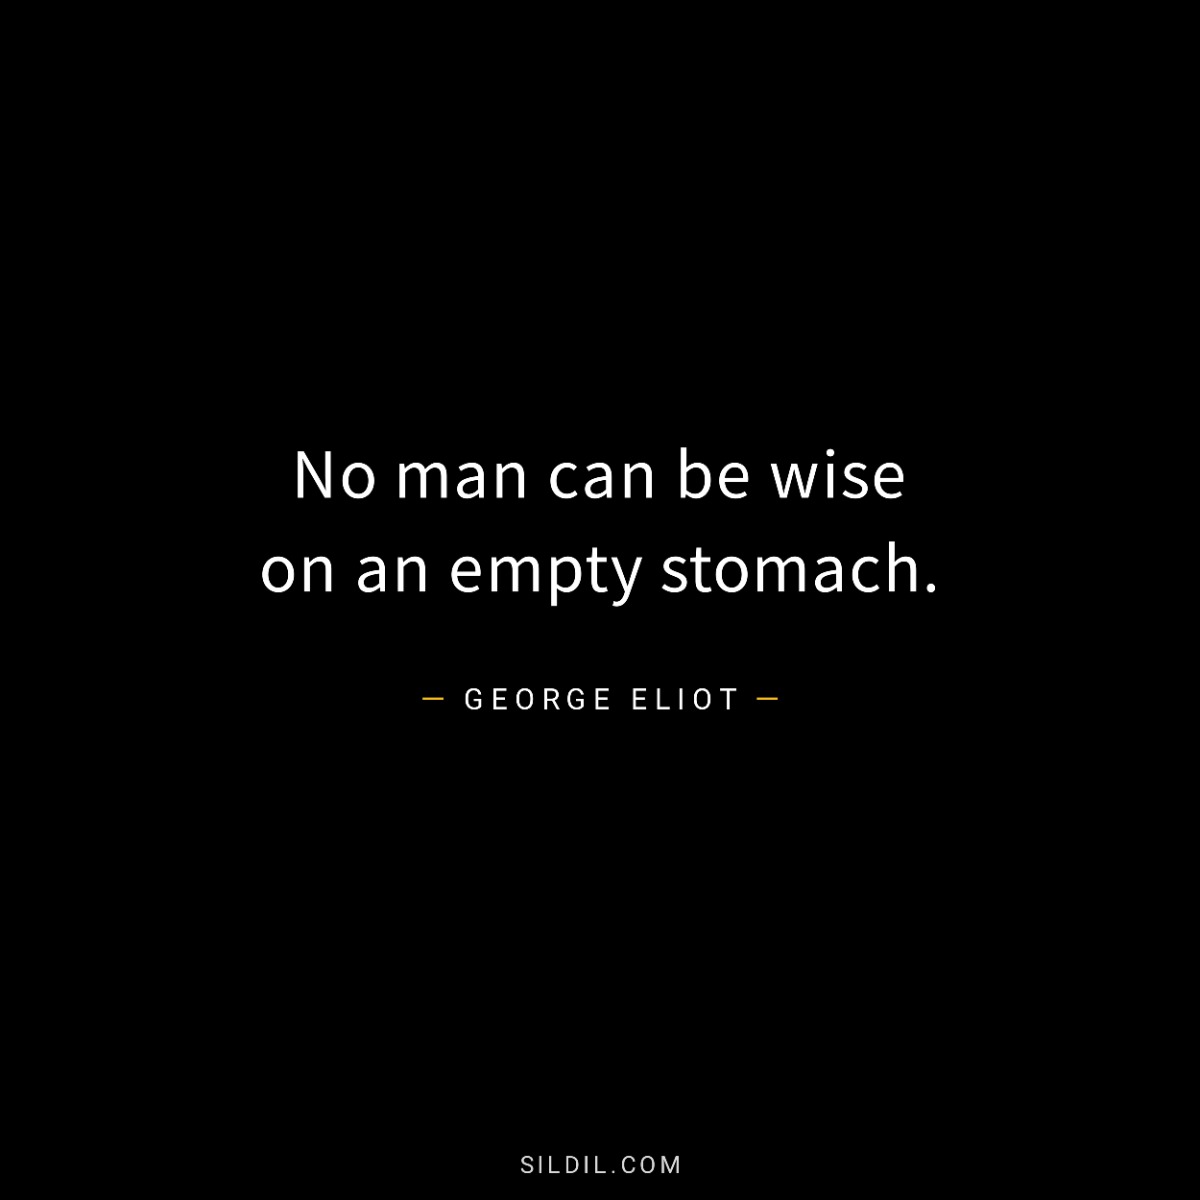 No man can be wise on an empty stomach.